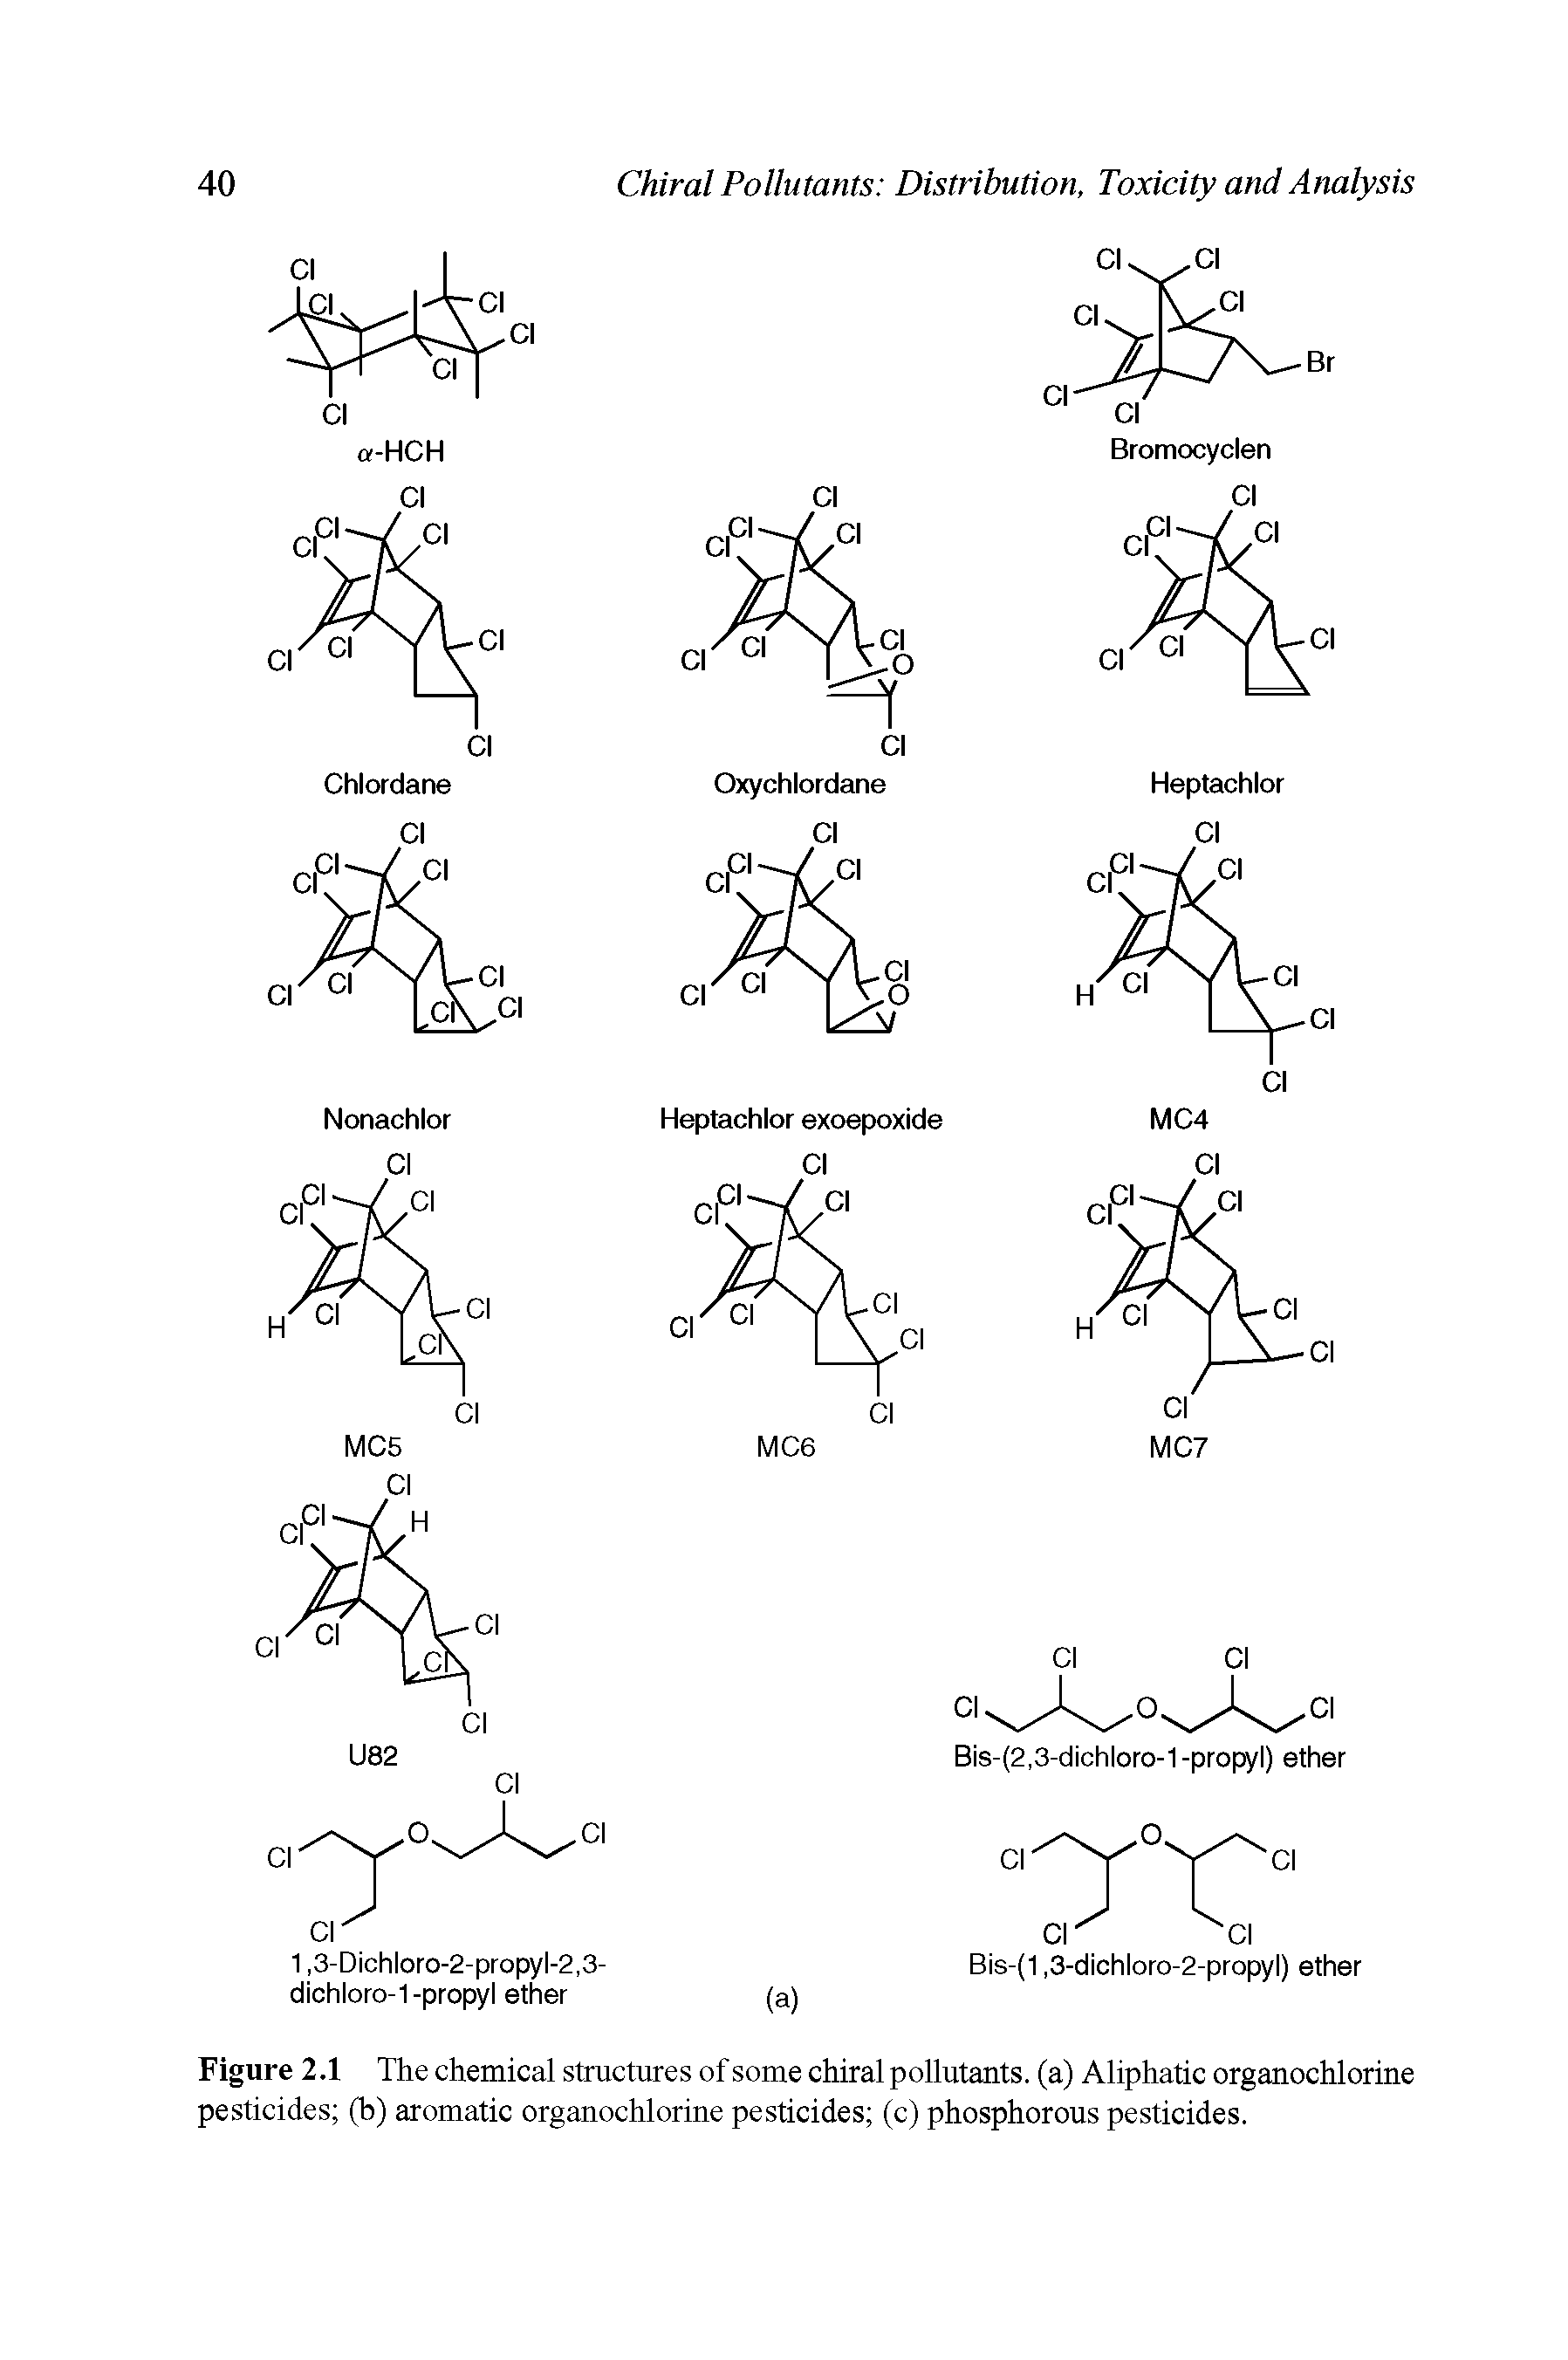 Figure 2.1 The chemical structures of some chiral pollutants, (a) Aliphatic organochlorine pesticides (b) aromatic organochlorine pesticides (c) phosphorous pesticides.